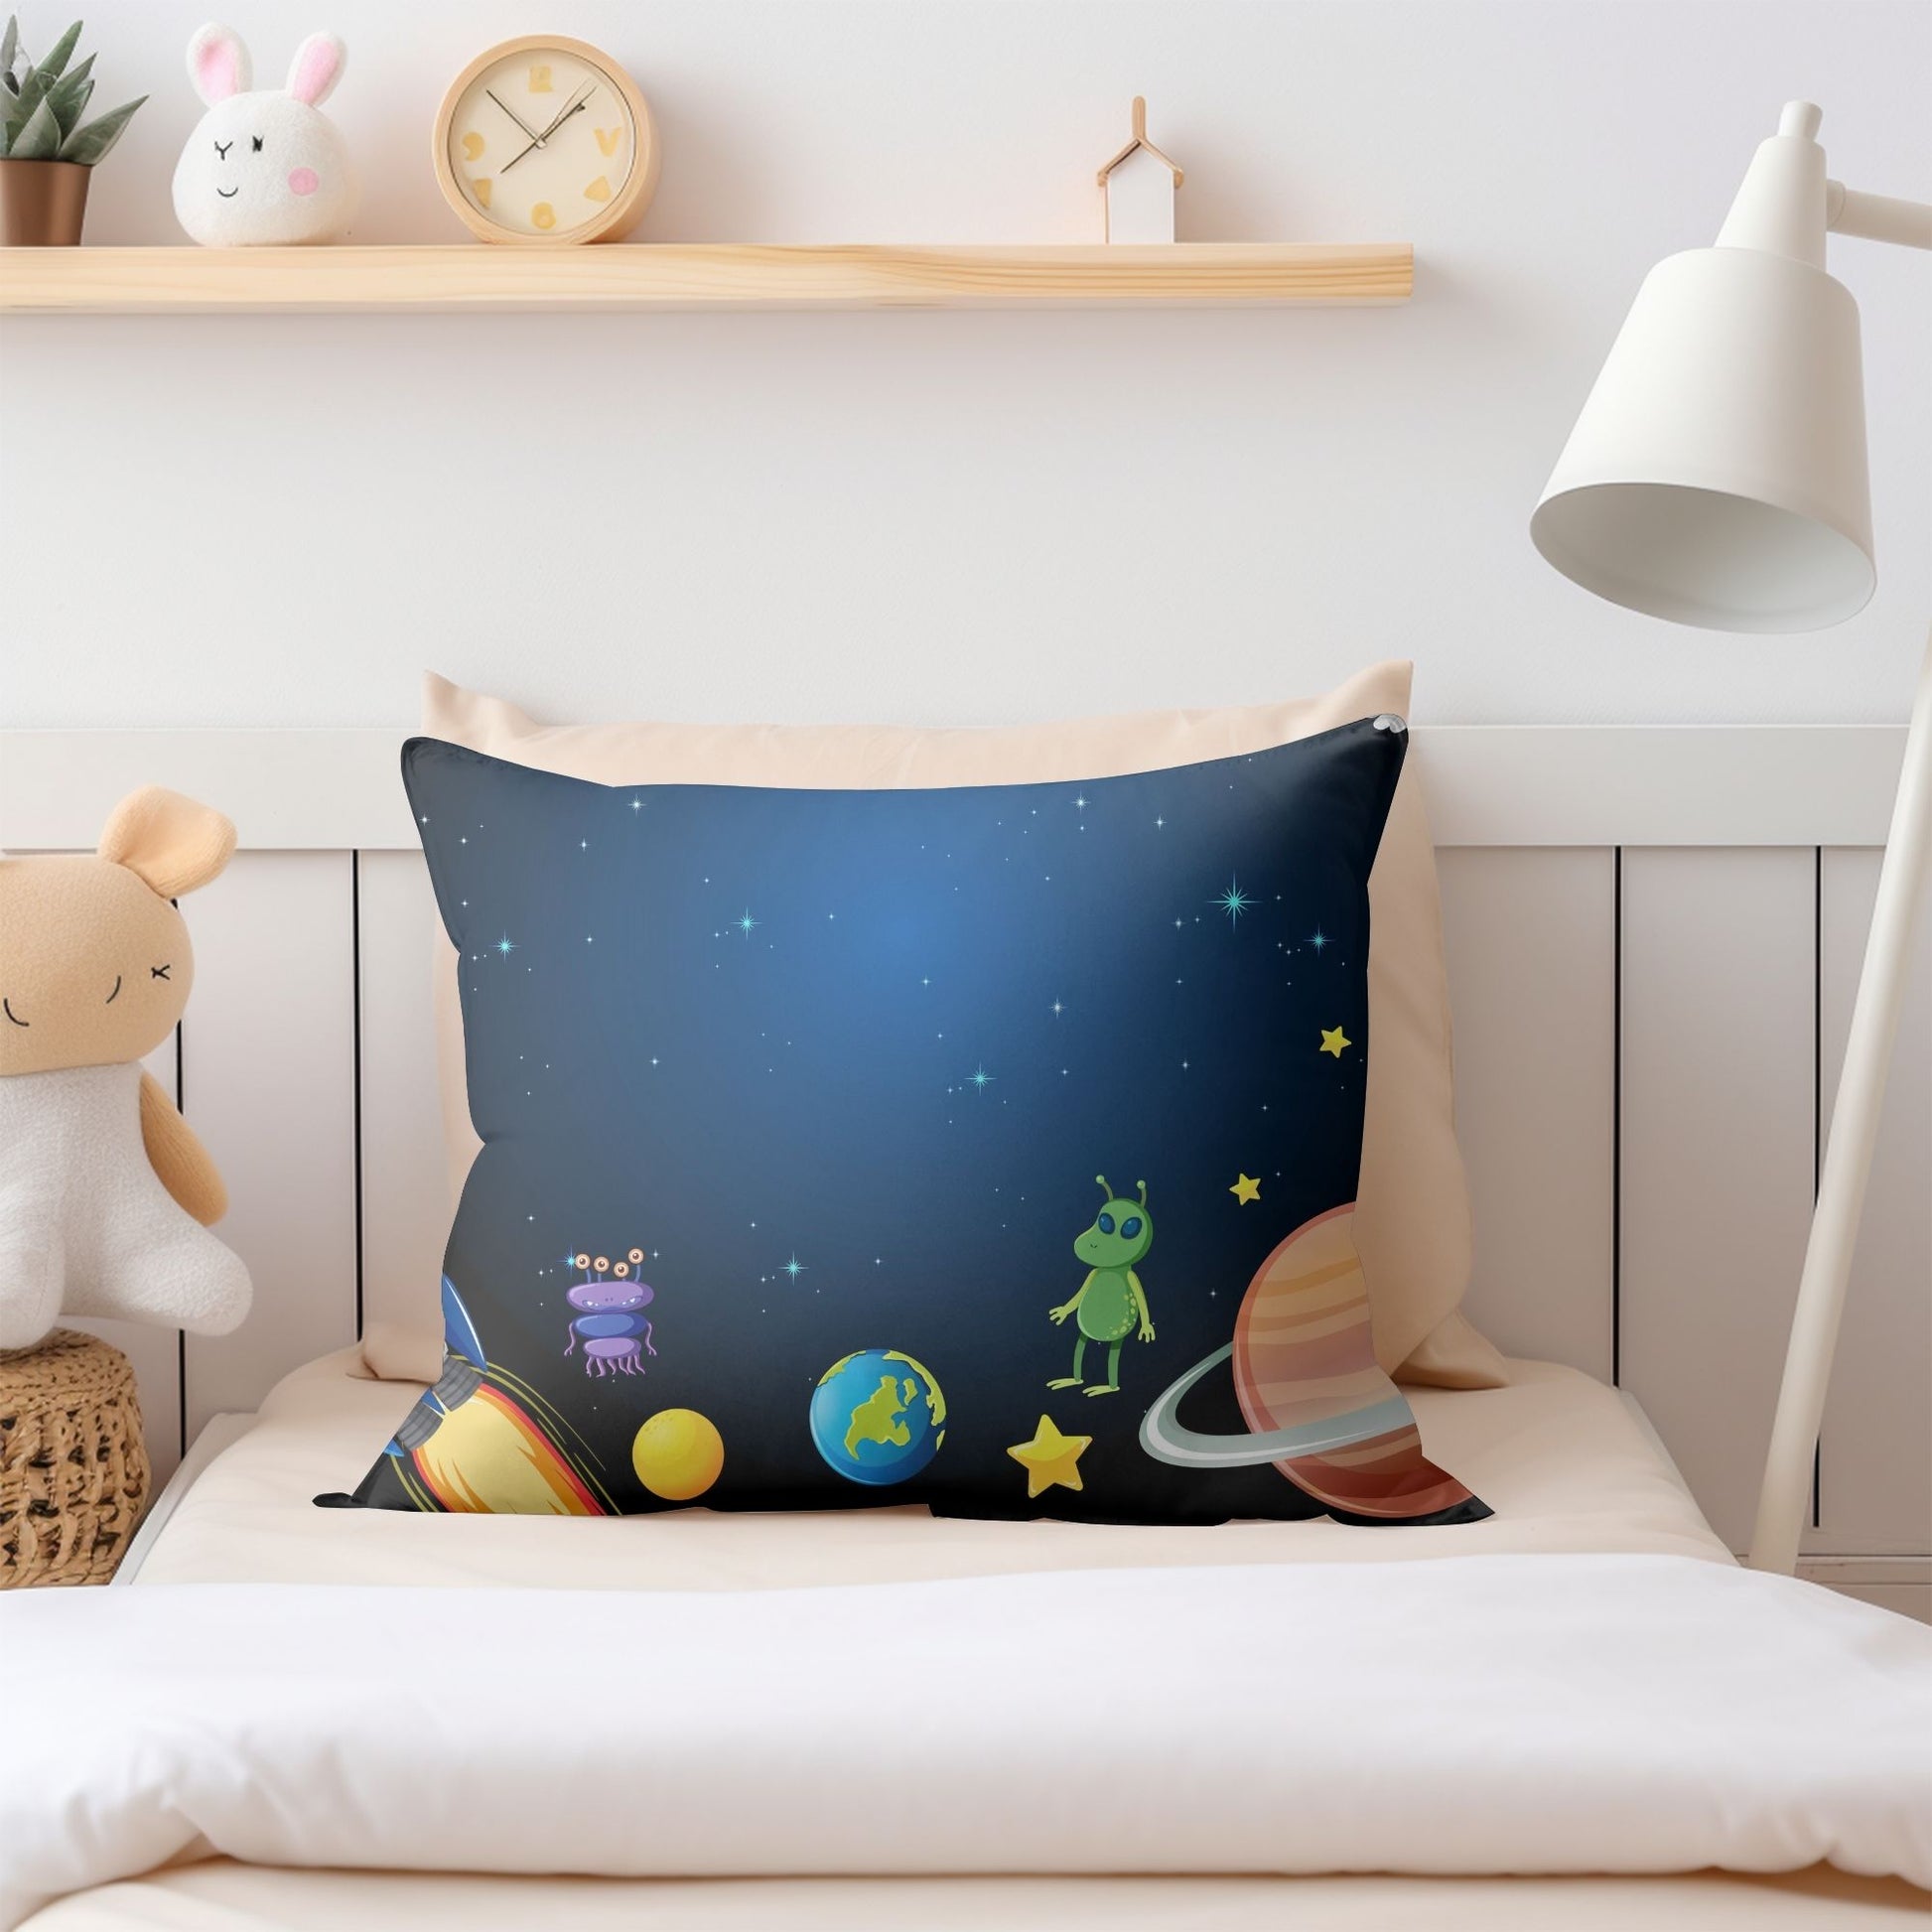 Kids pillow featuring cute aliens pattern for playful dreams.